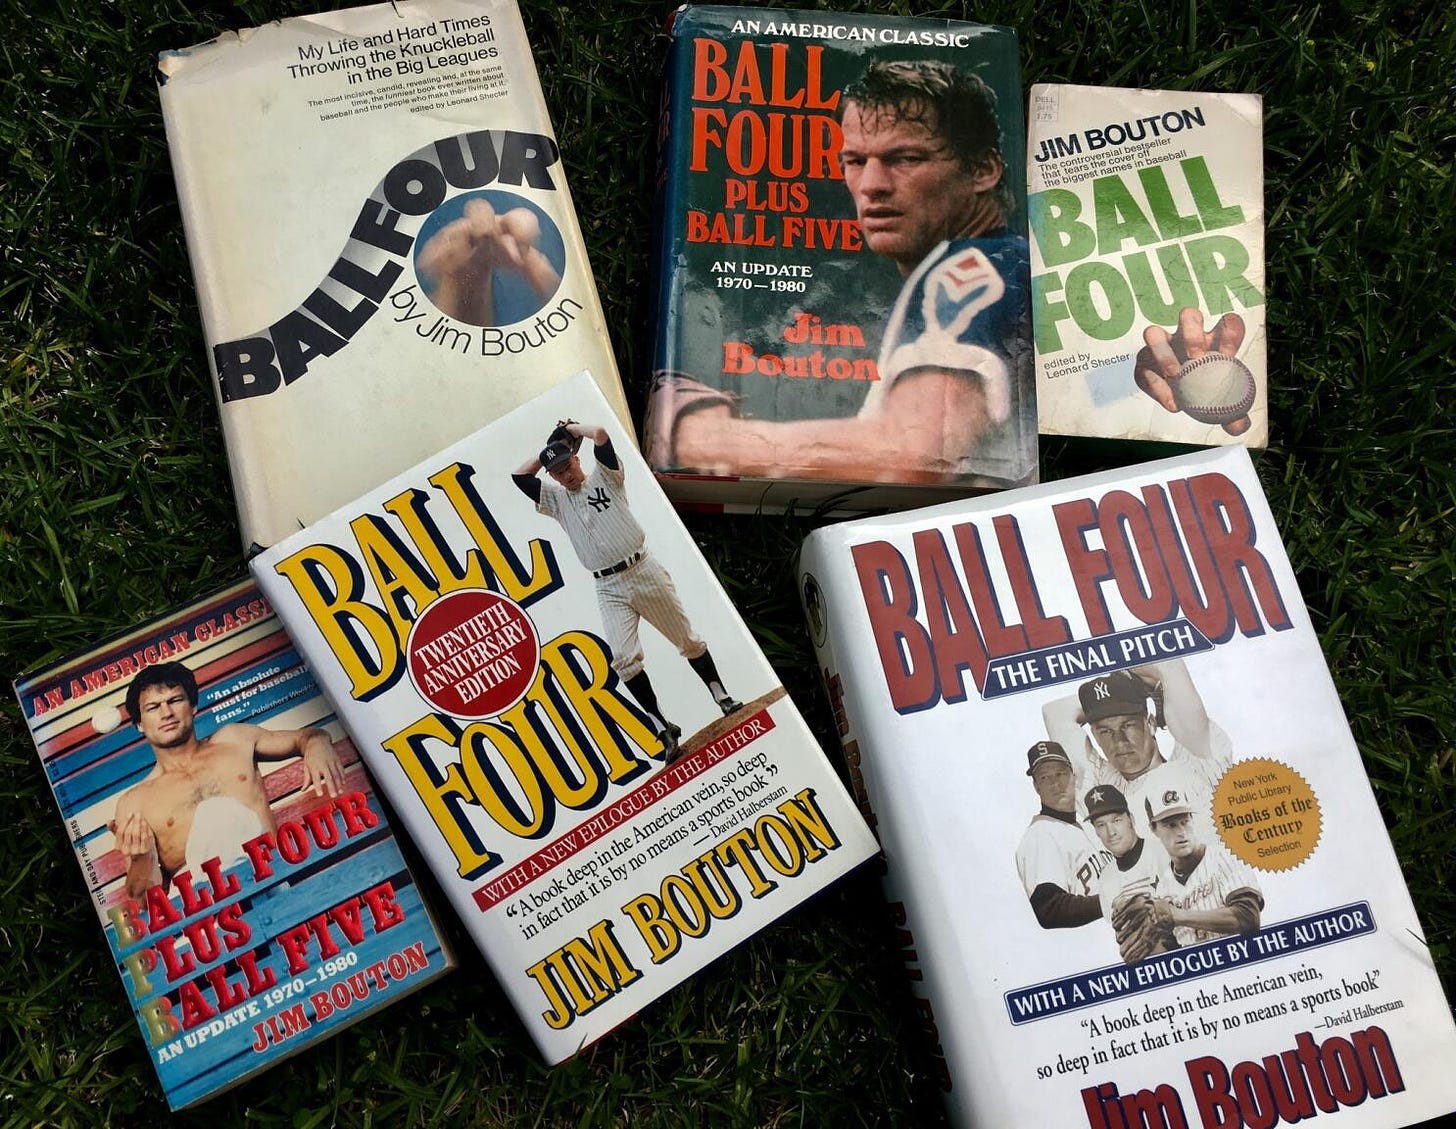 Ball Four' author Jim Bouton smoked baseball inside until the very end -  Los Angeles Times